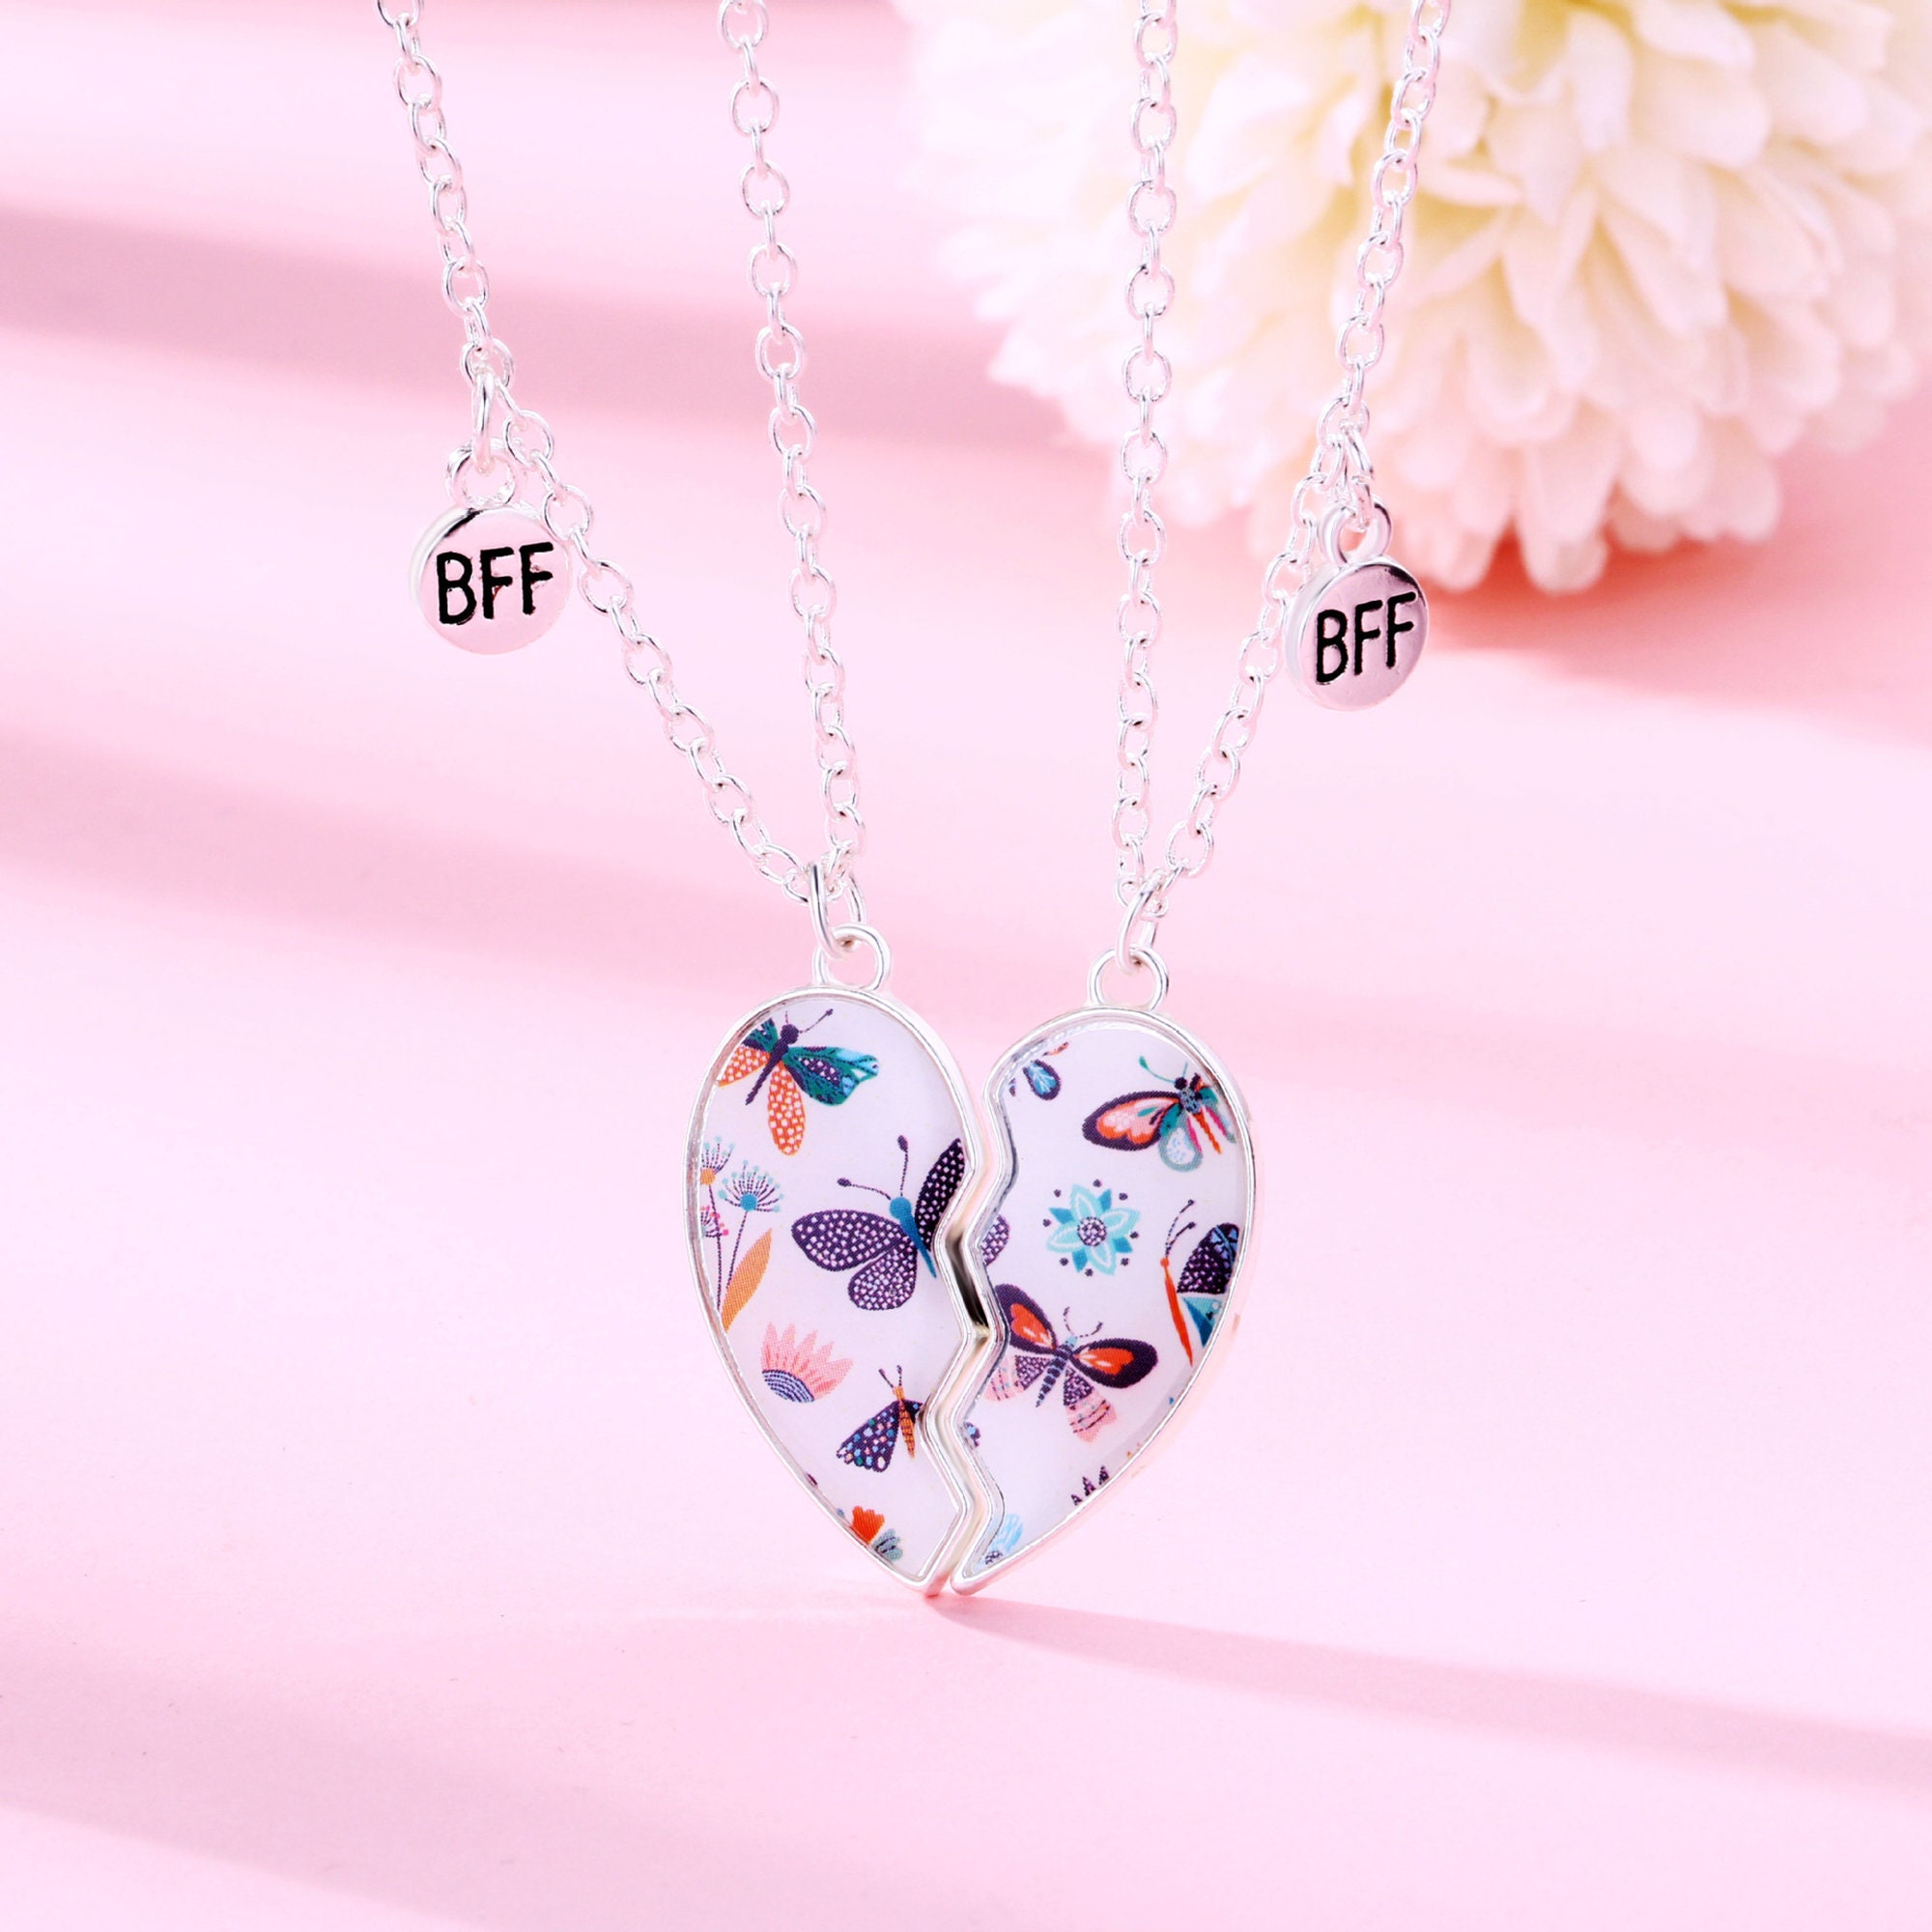 Buy DOYYCA Friendship Necklace Best Friend Necklace for 3 Girls Magnetic  Matching Heart Pendant BFF Necklaces for Sister, Brass, No Gemstone at  Amazon.in